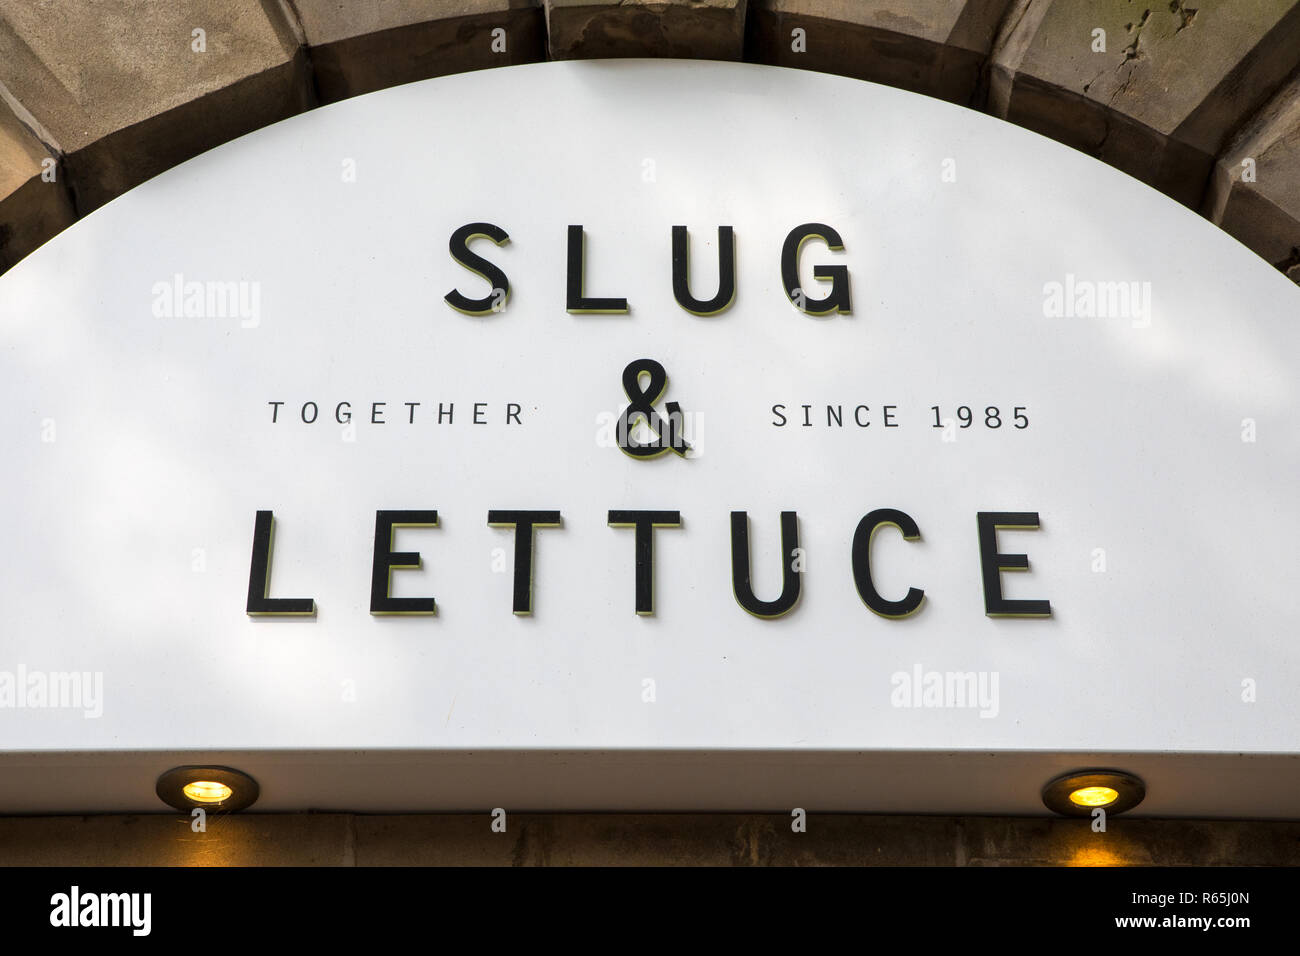 COVENTRY, UK - JULY 26TH 2018: The sign above the entrance of a Slug & Lettuce bar in the city centre of Coventry in the UK, on 26th Julu 2018. Stock Photo